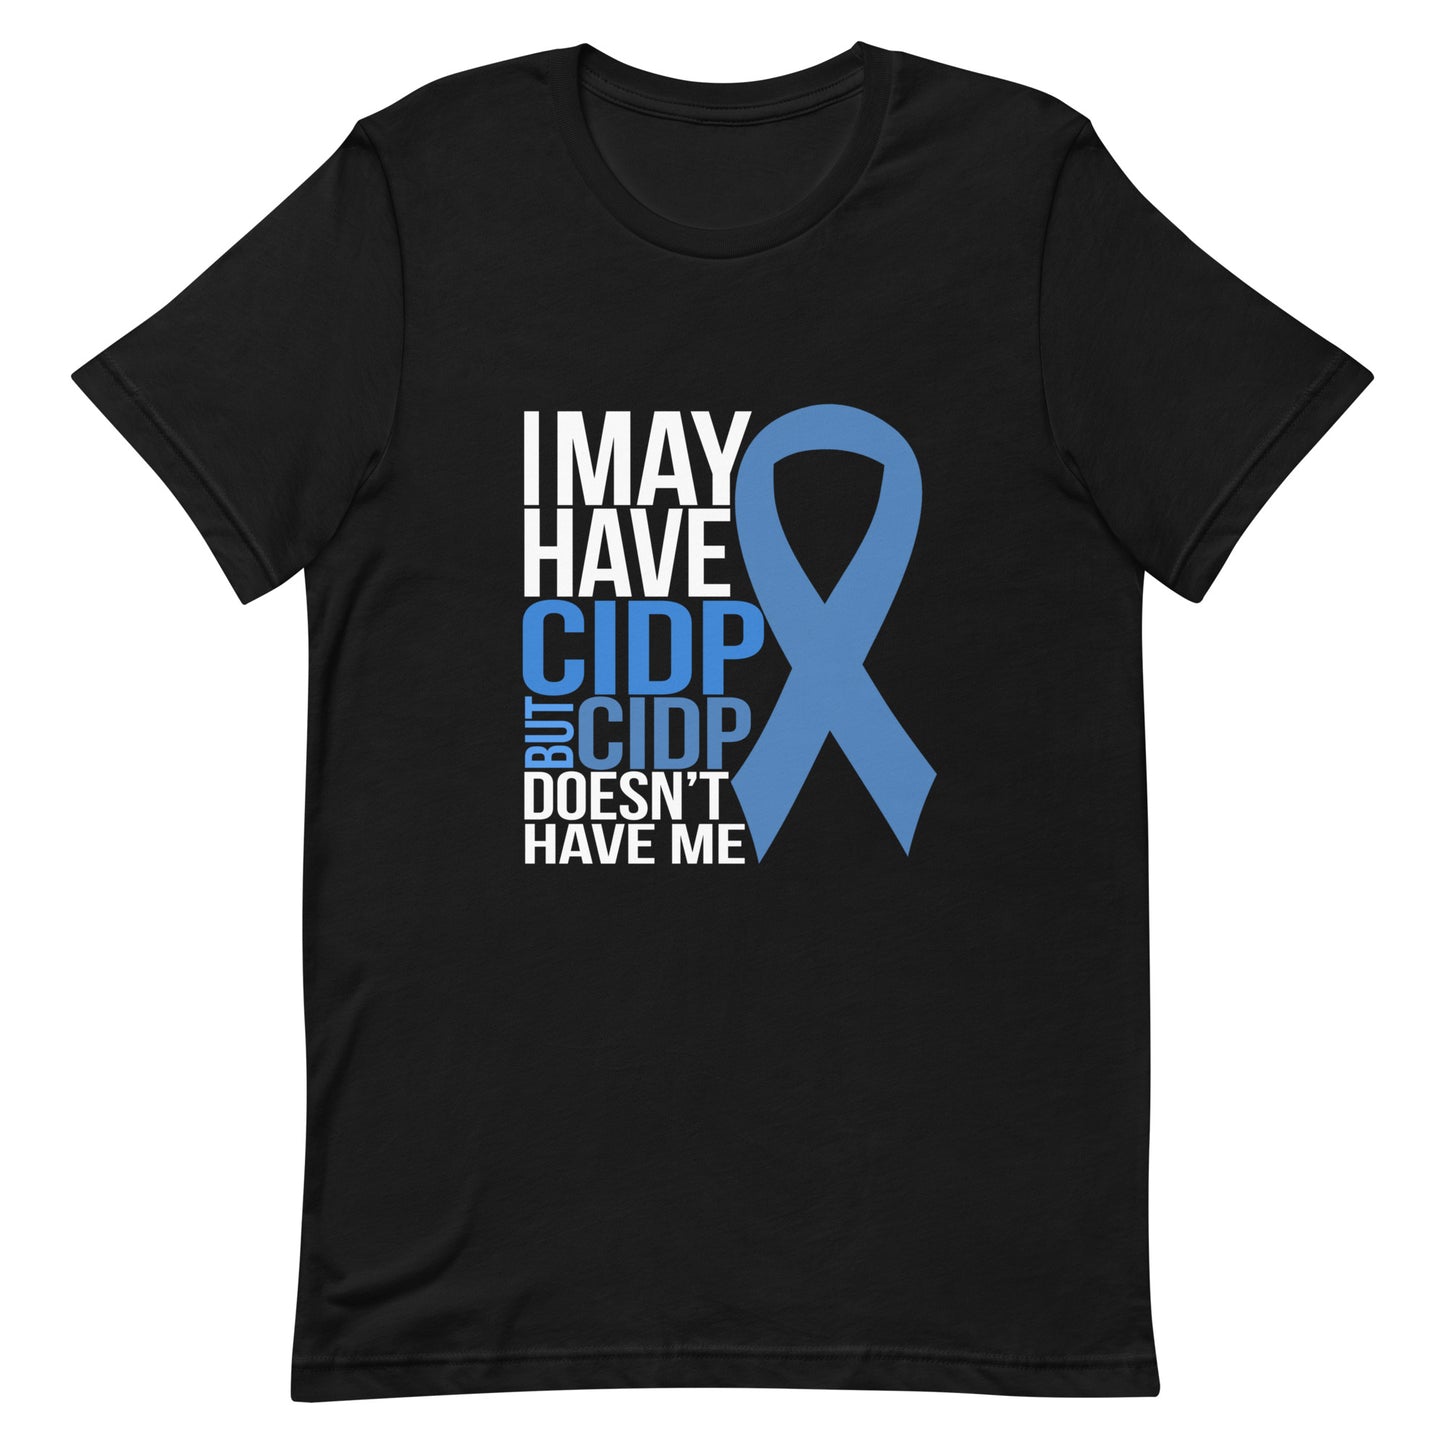 I May Have CIDP But CIDP Doesn't Have Me Shirt